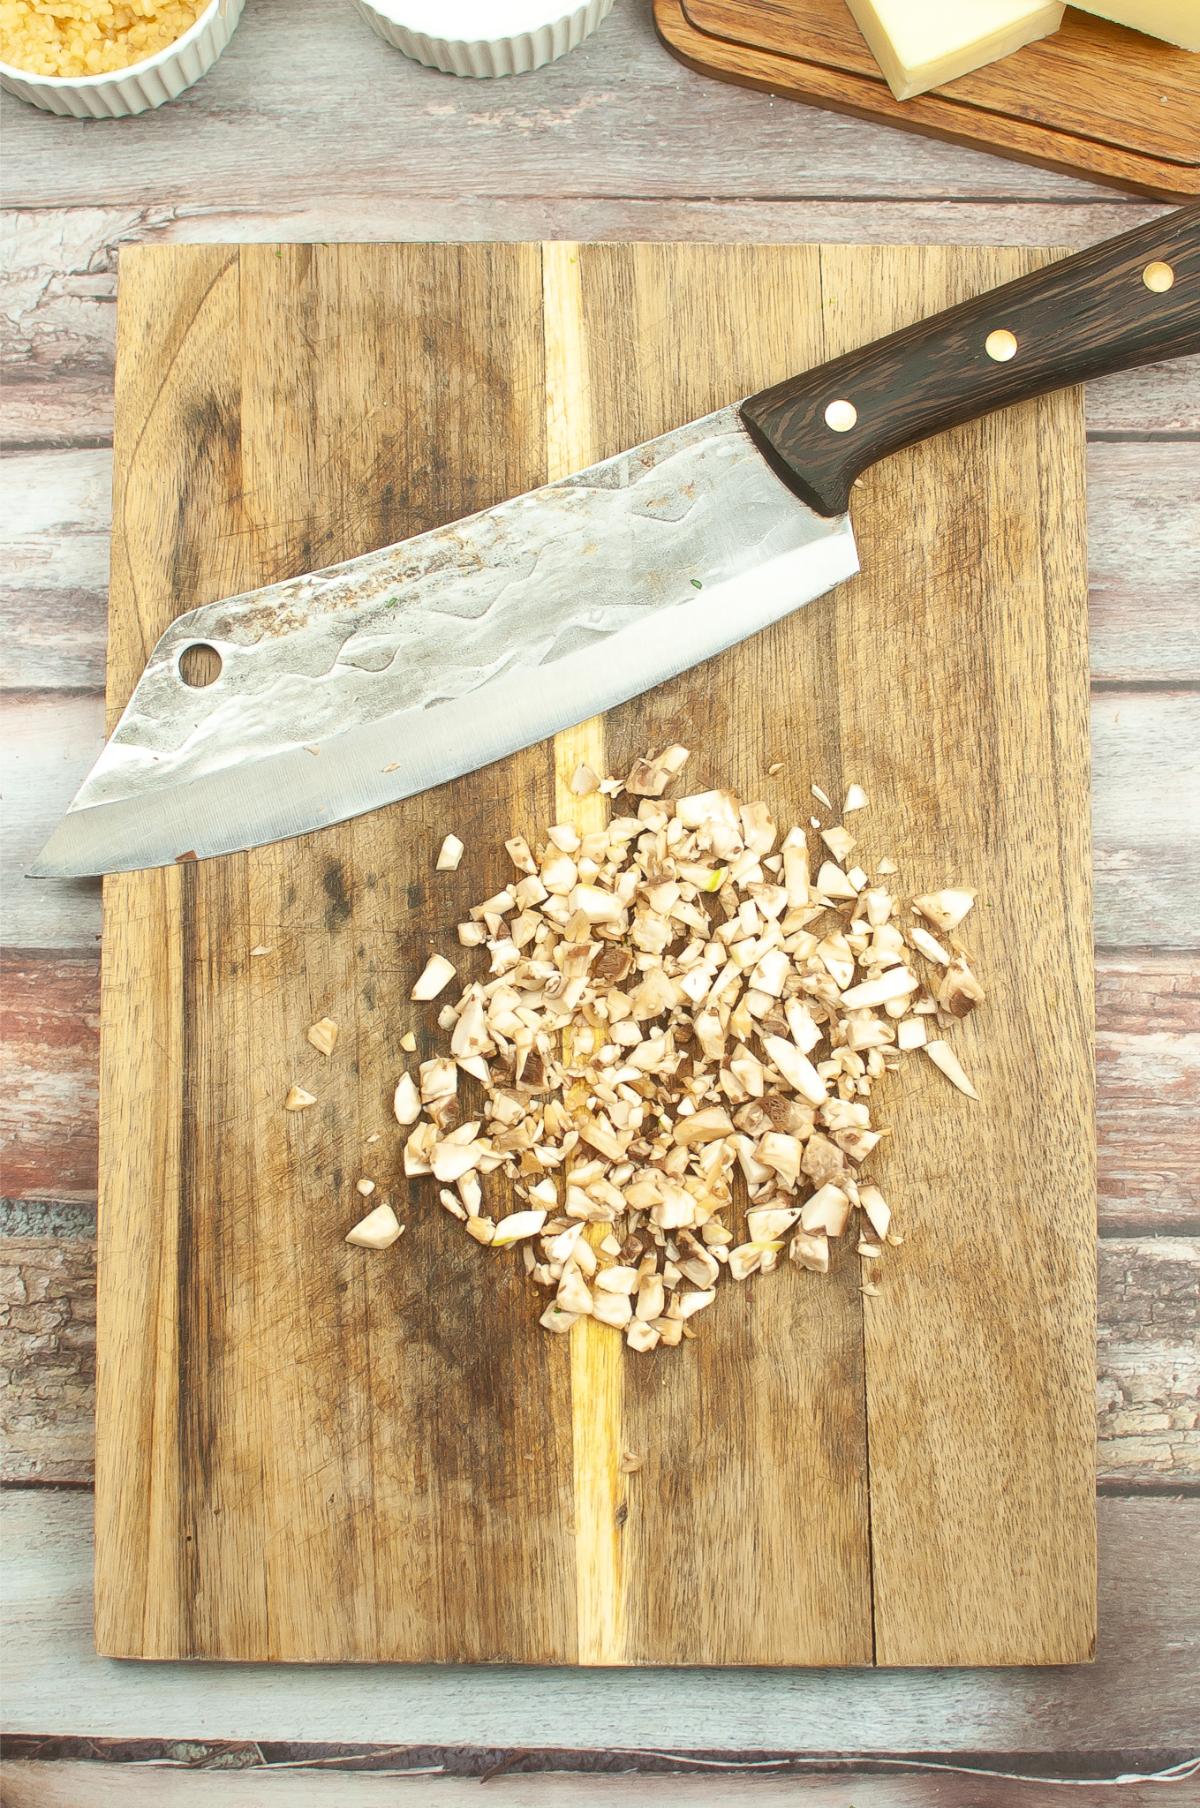 A cutting board with chopped mushrooms and big knife.